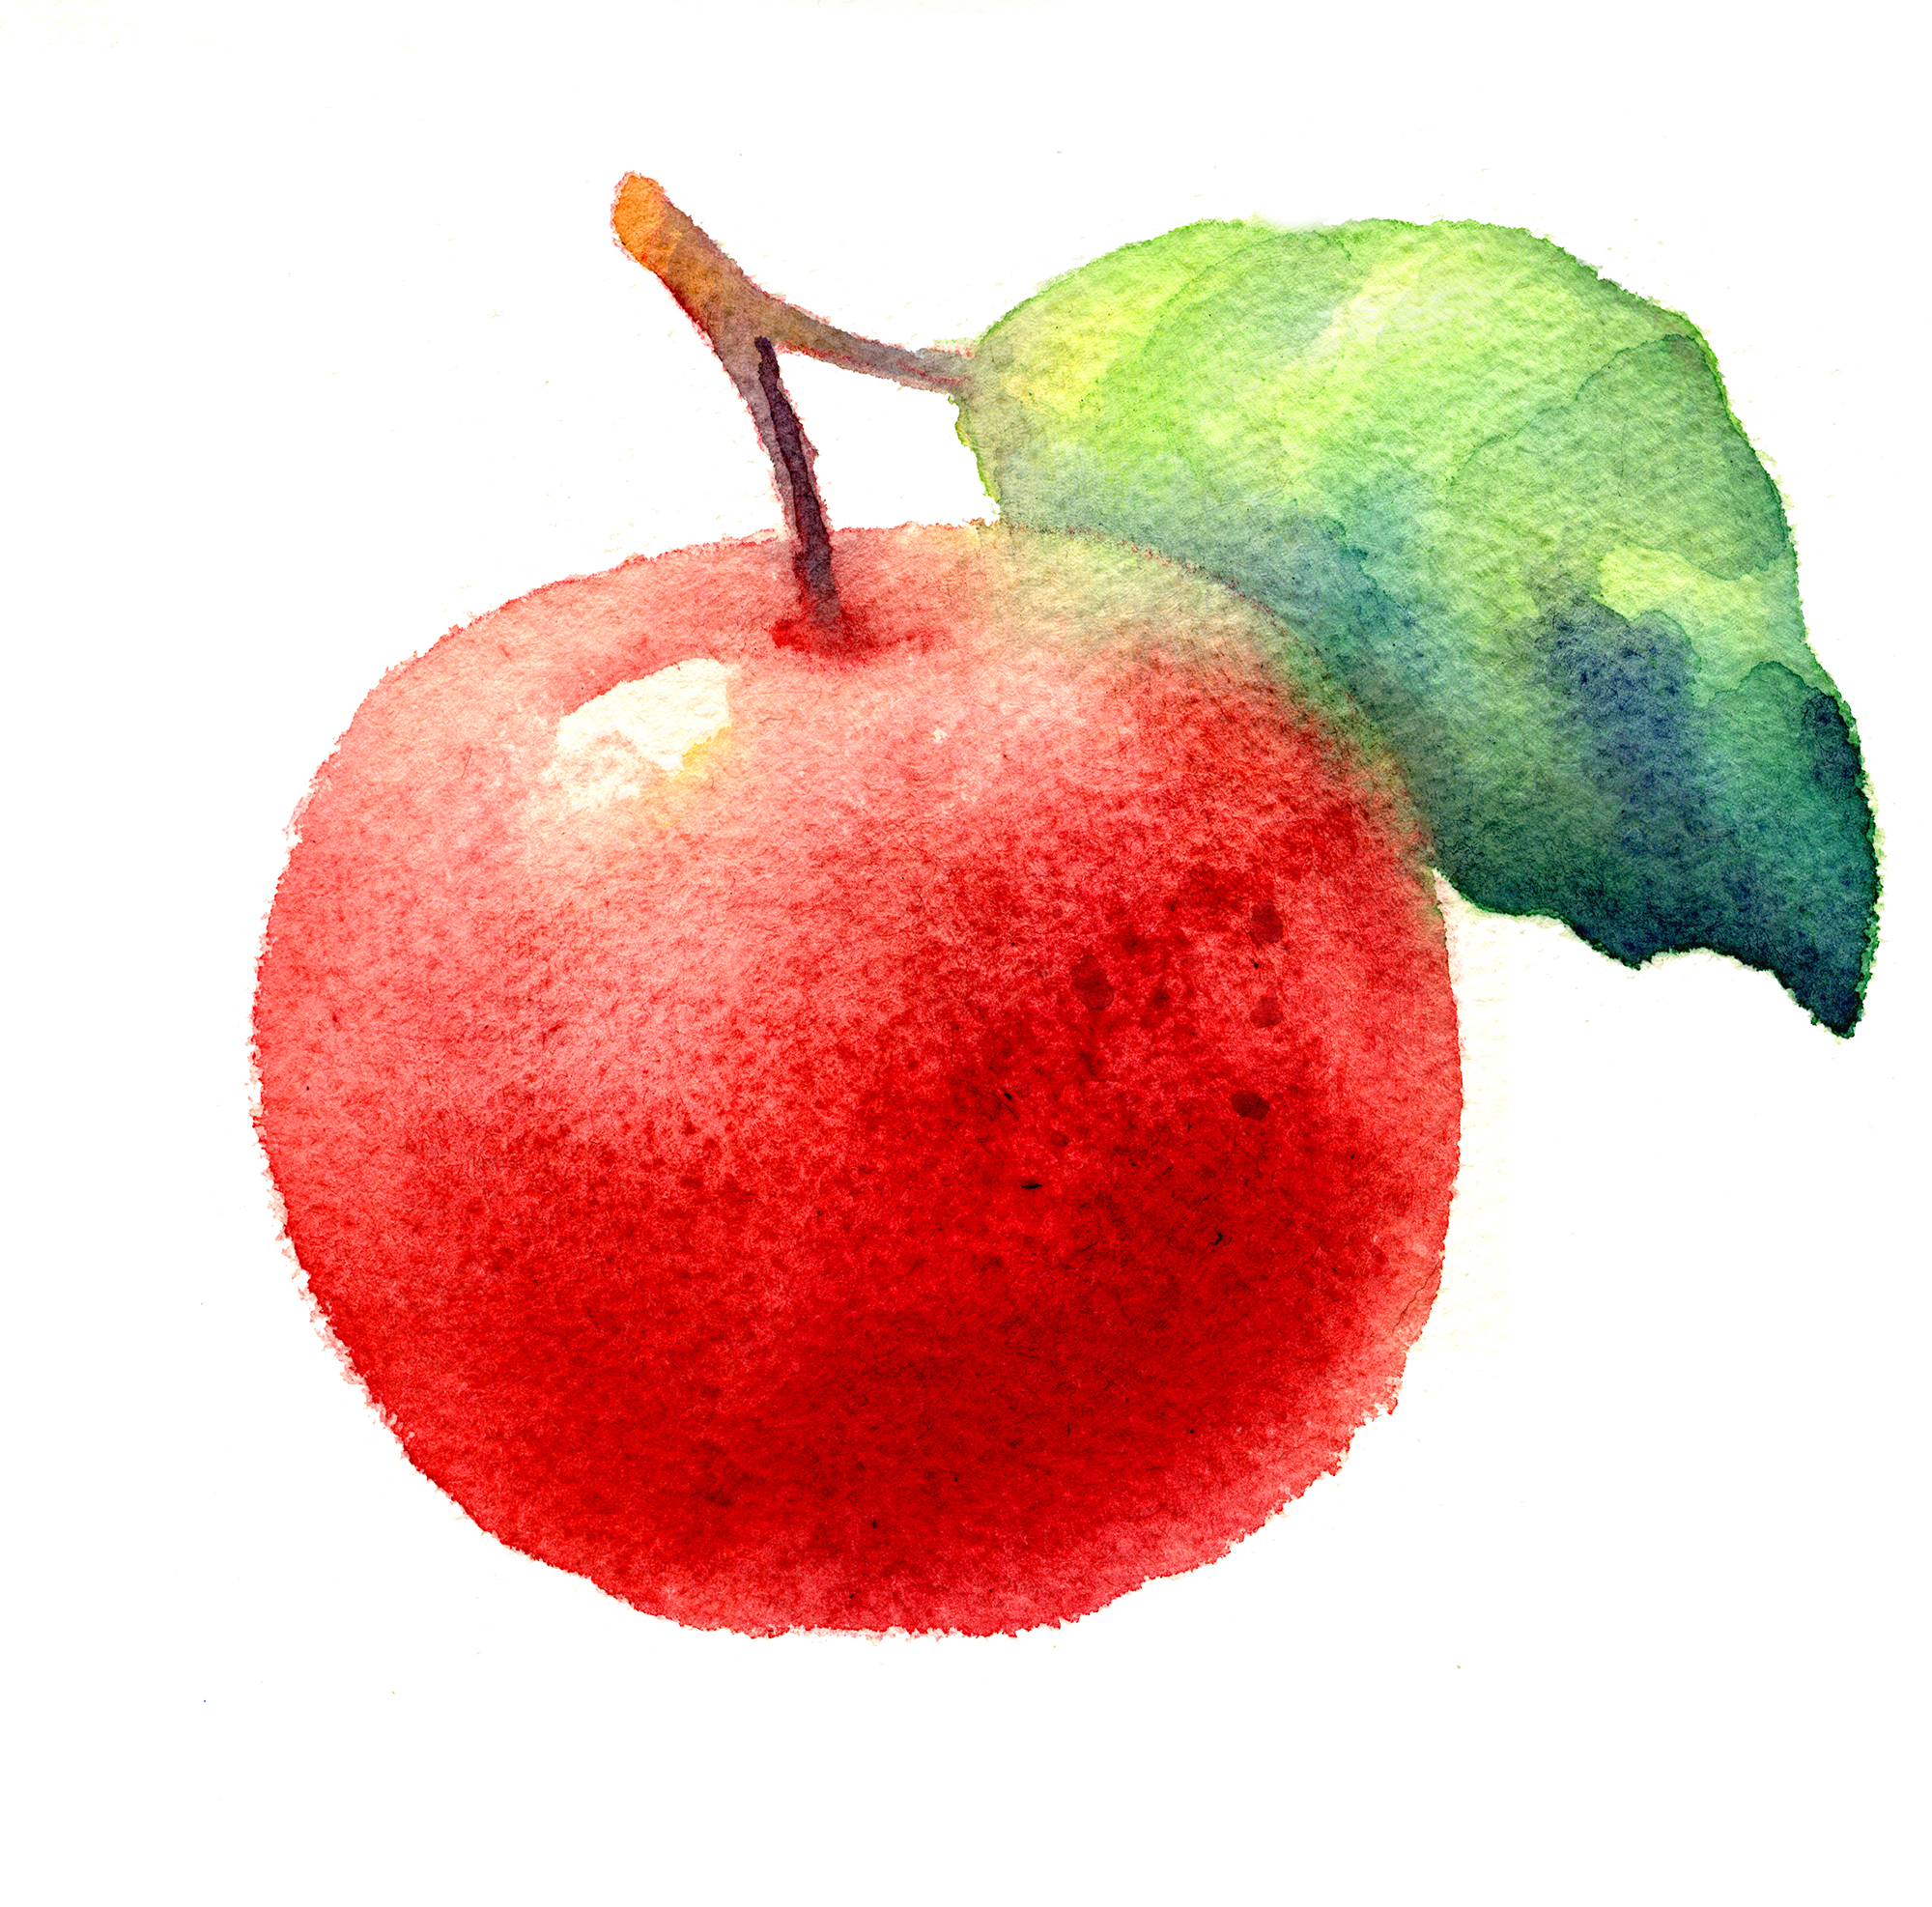 Test apples in watercolor for Blossa Glögg.